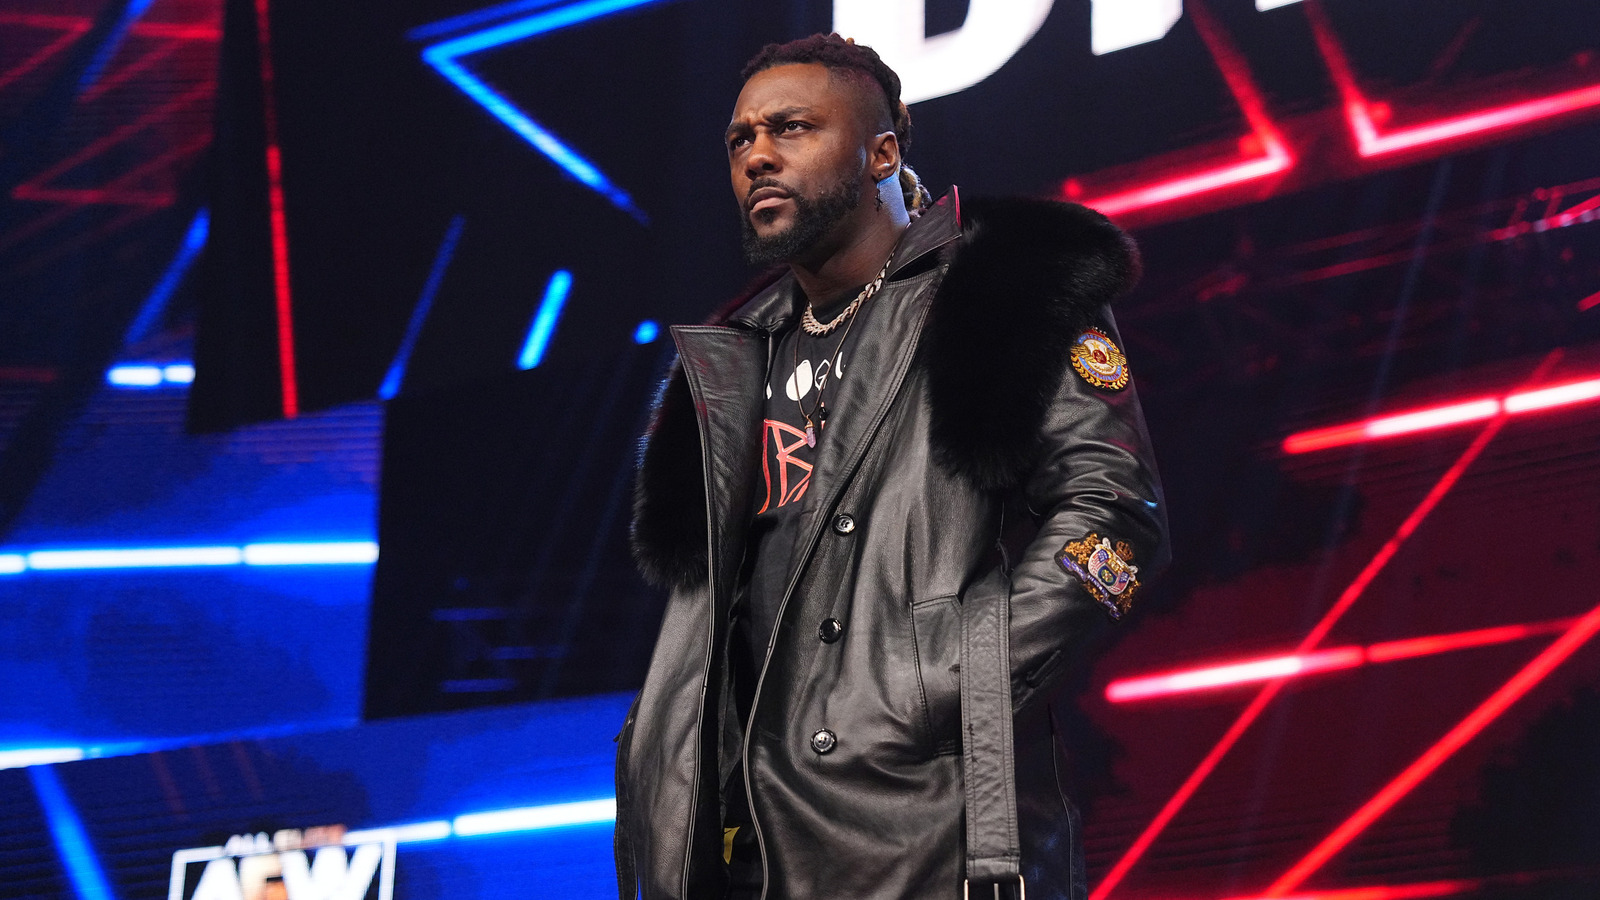 AEW's Swerve Strickland Wants A Match Against This Former WWE Superstar